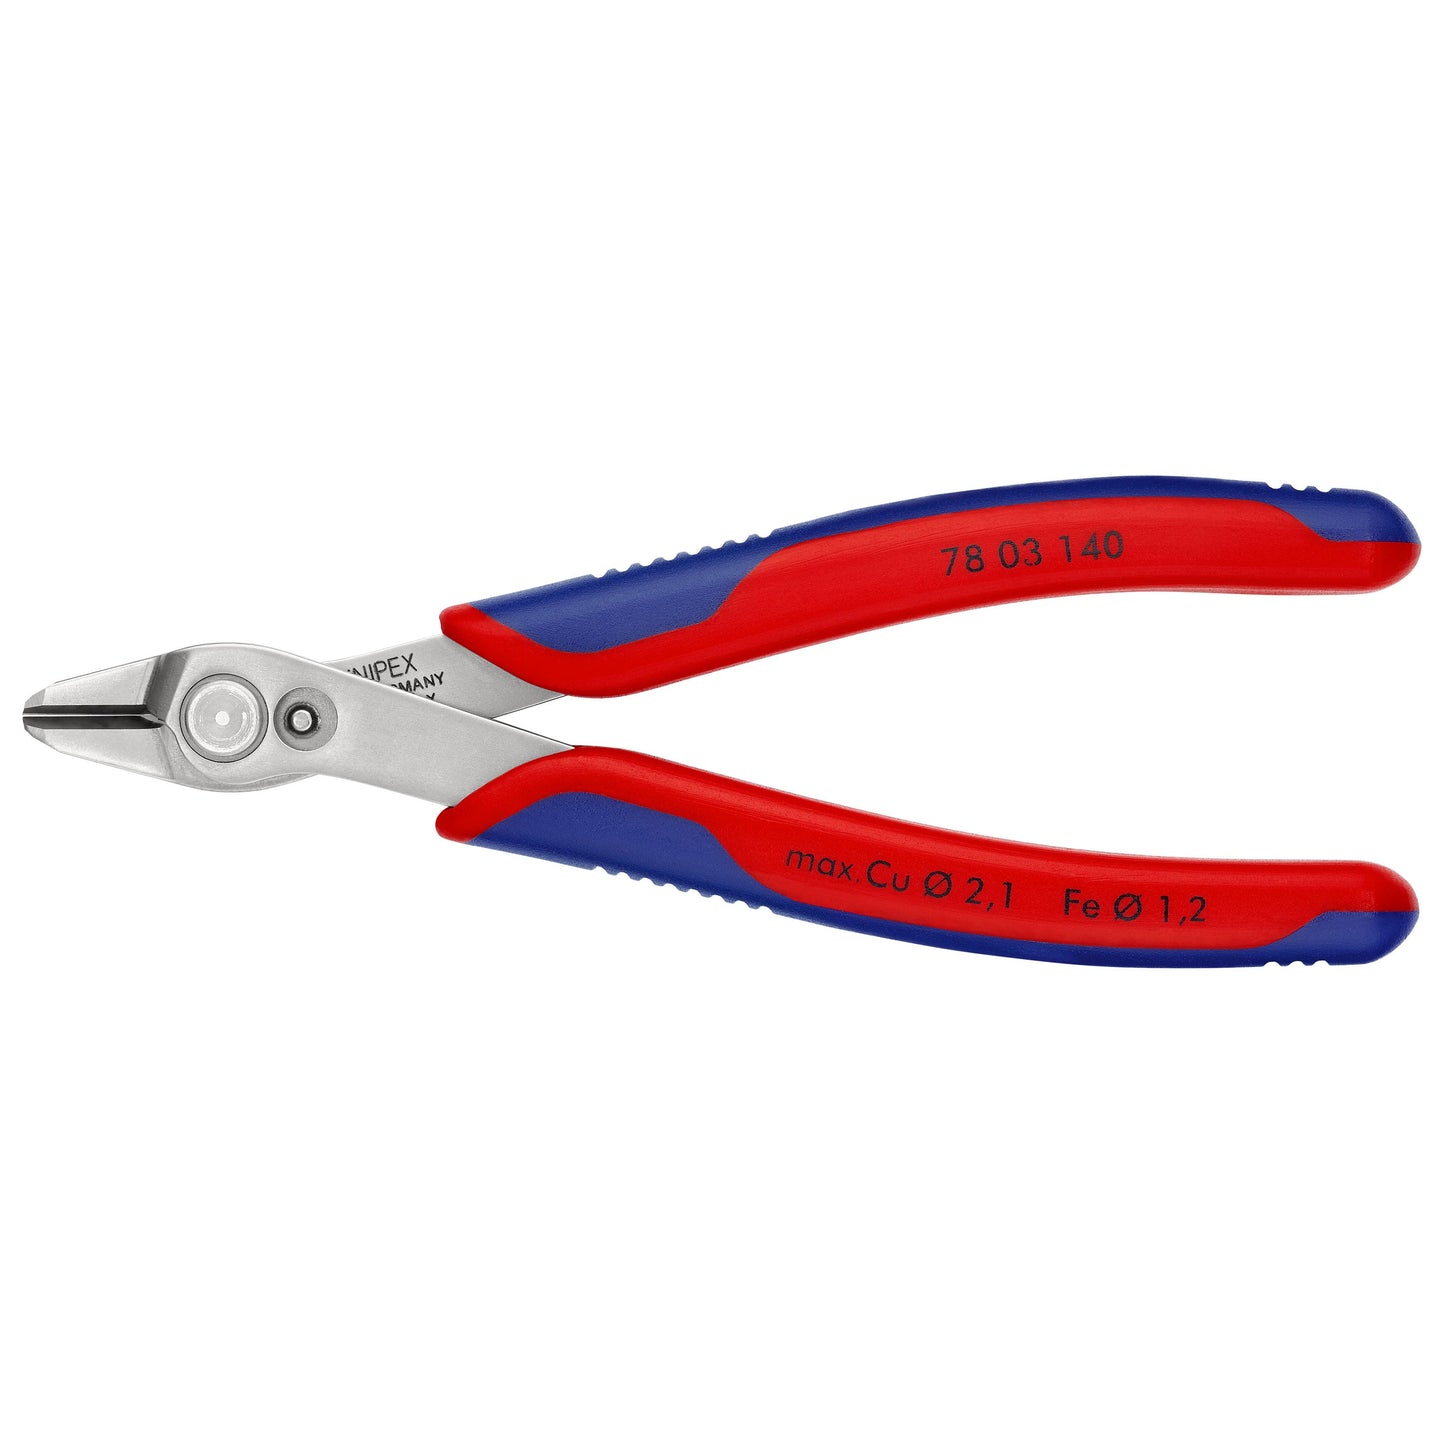 Knipex 78 03 140 - Stainless steel pliers. cutting tool for electronics Knipex SuperKnips XL 140 mm. with two-component handles. Bevelless edges.